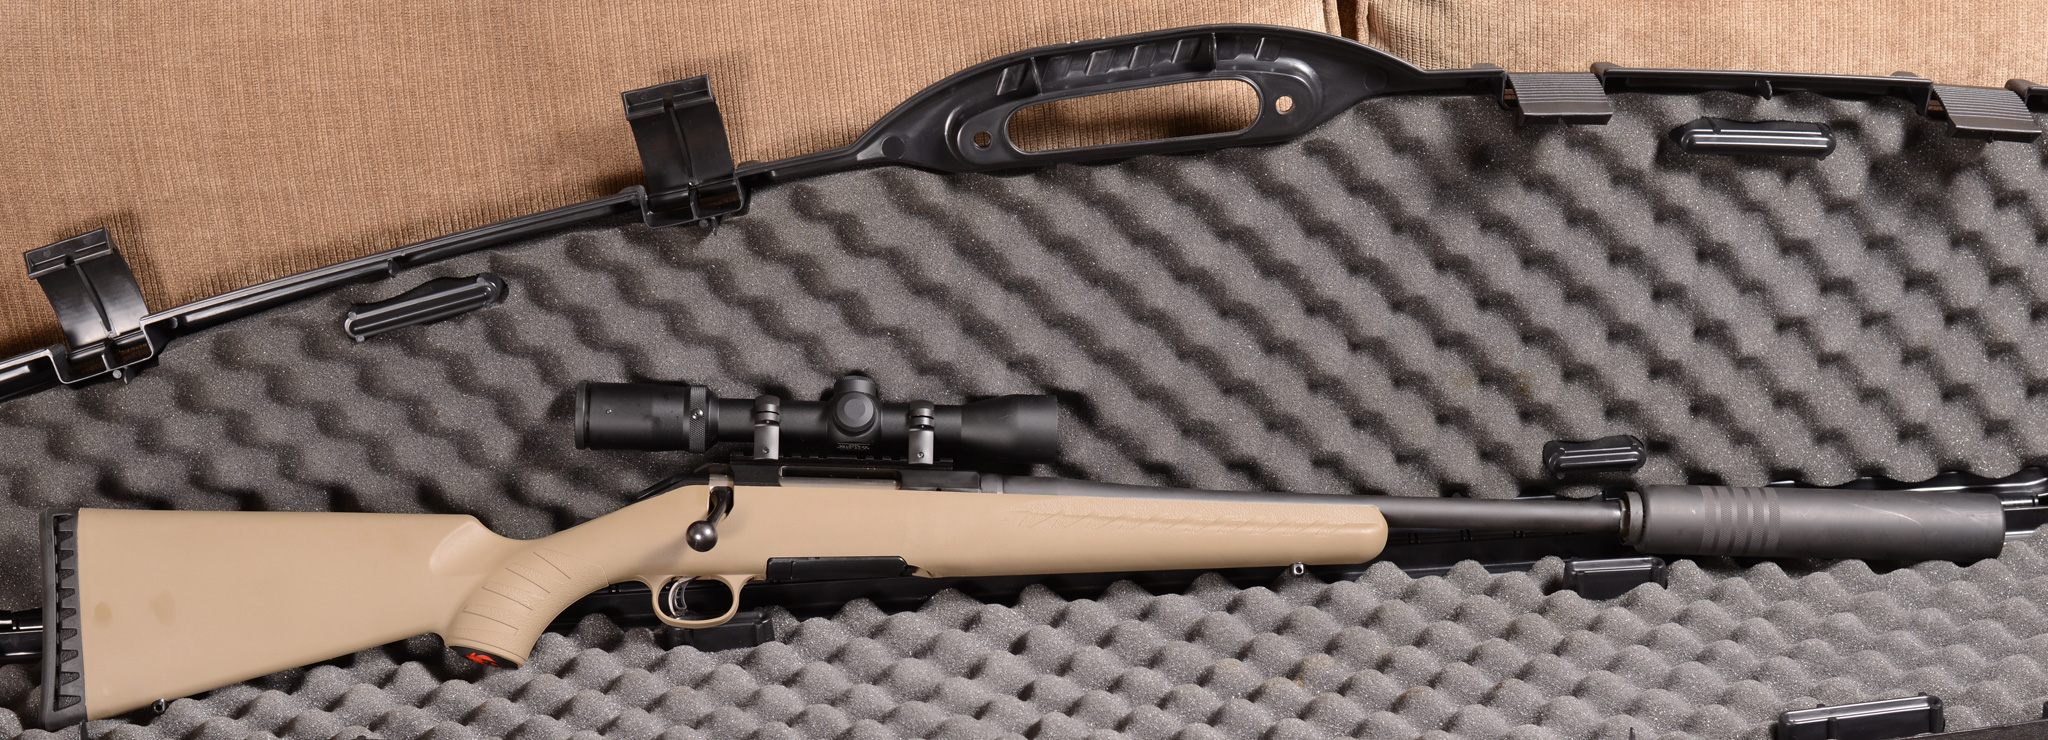 The Ruger American rifle in .300 Blackout - detailed review! 